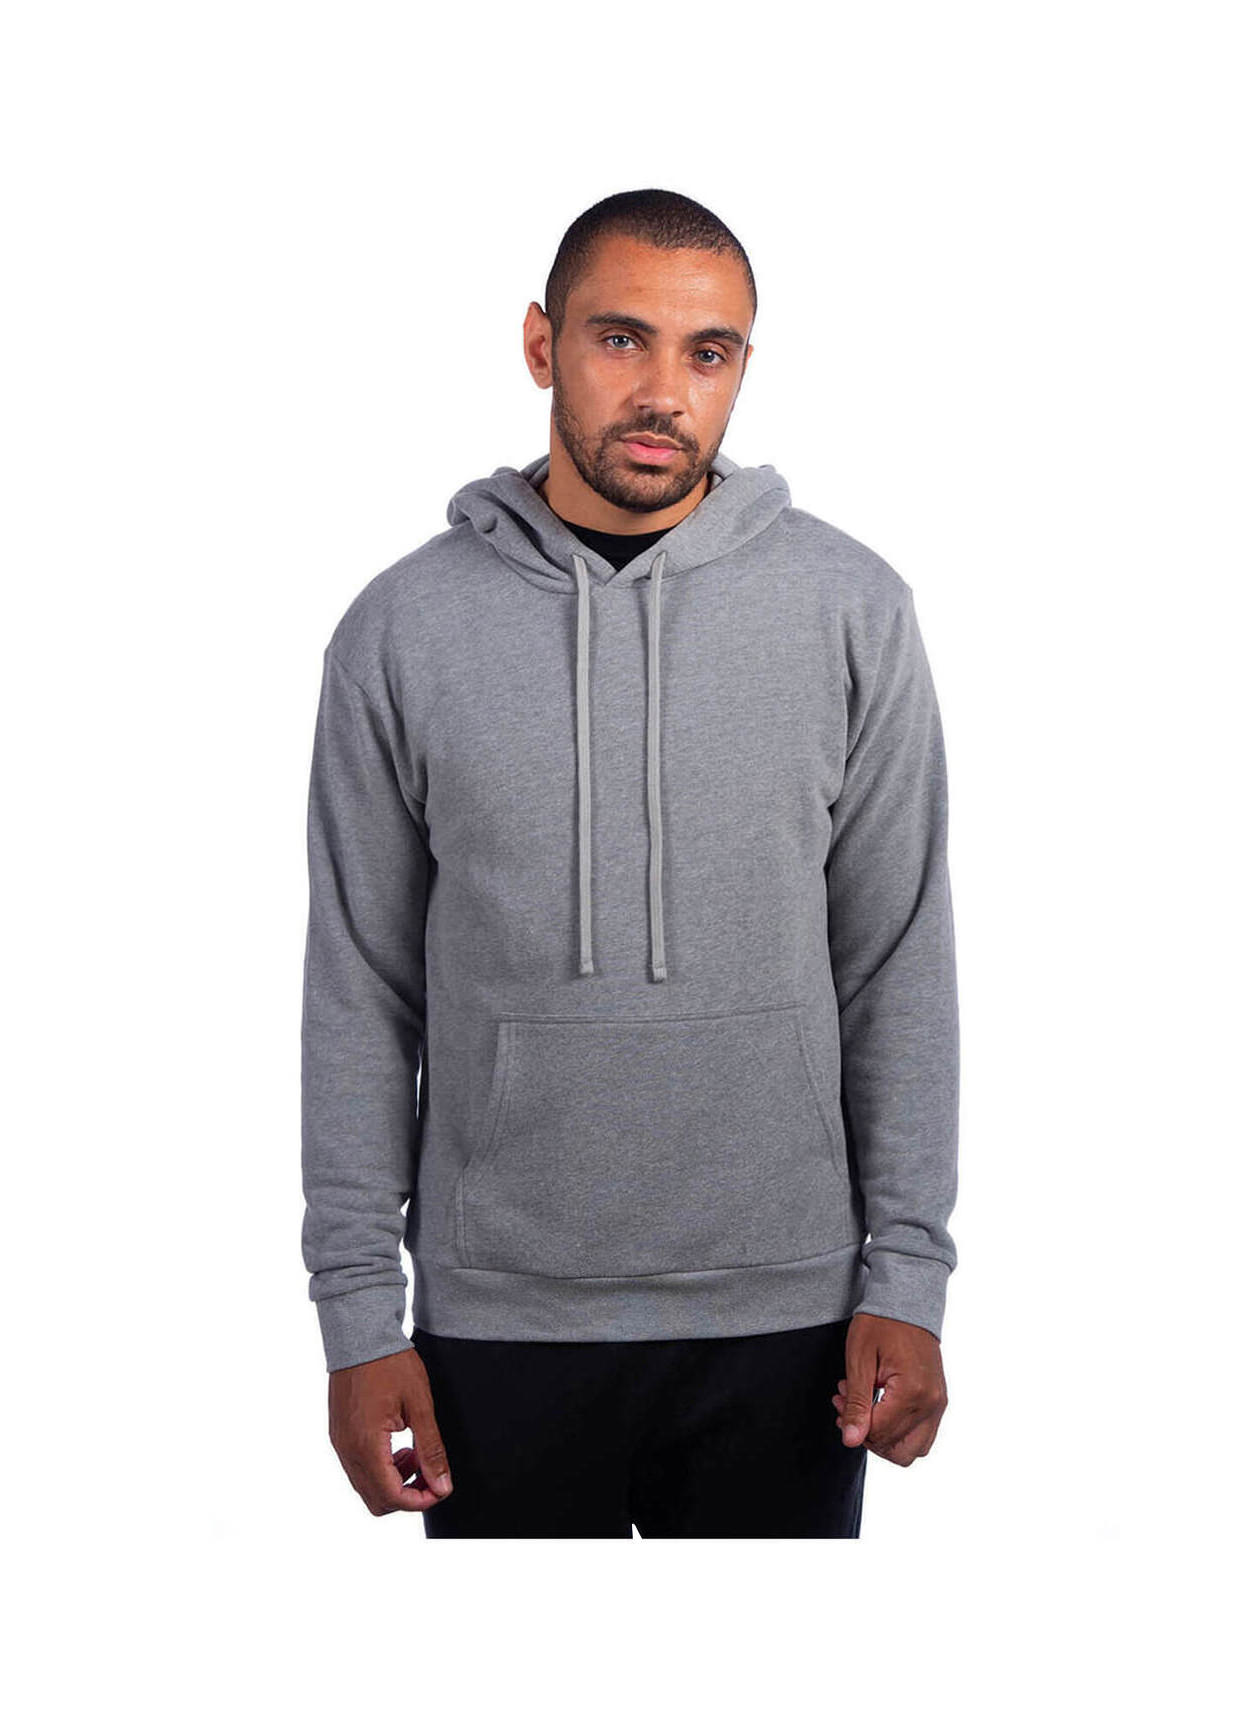 Next Level Men's Heather Gray Unisex Sueded French Terry Pullover Hoodie